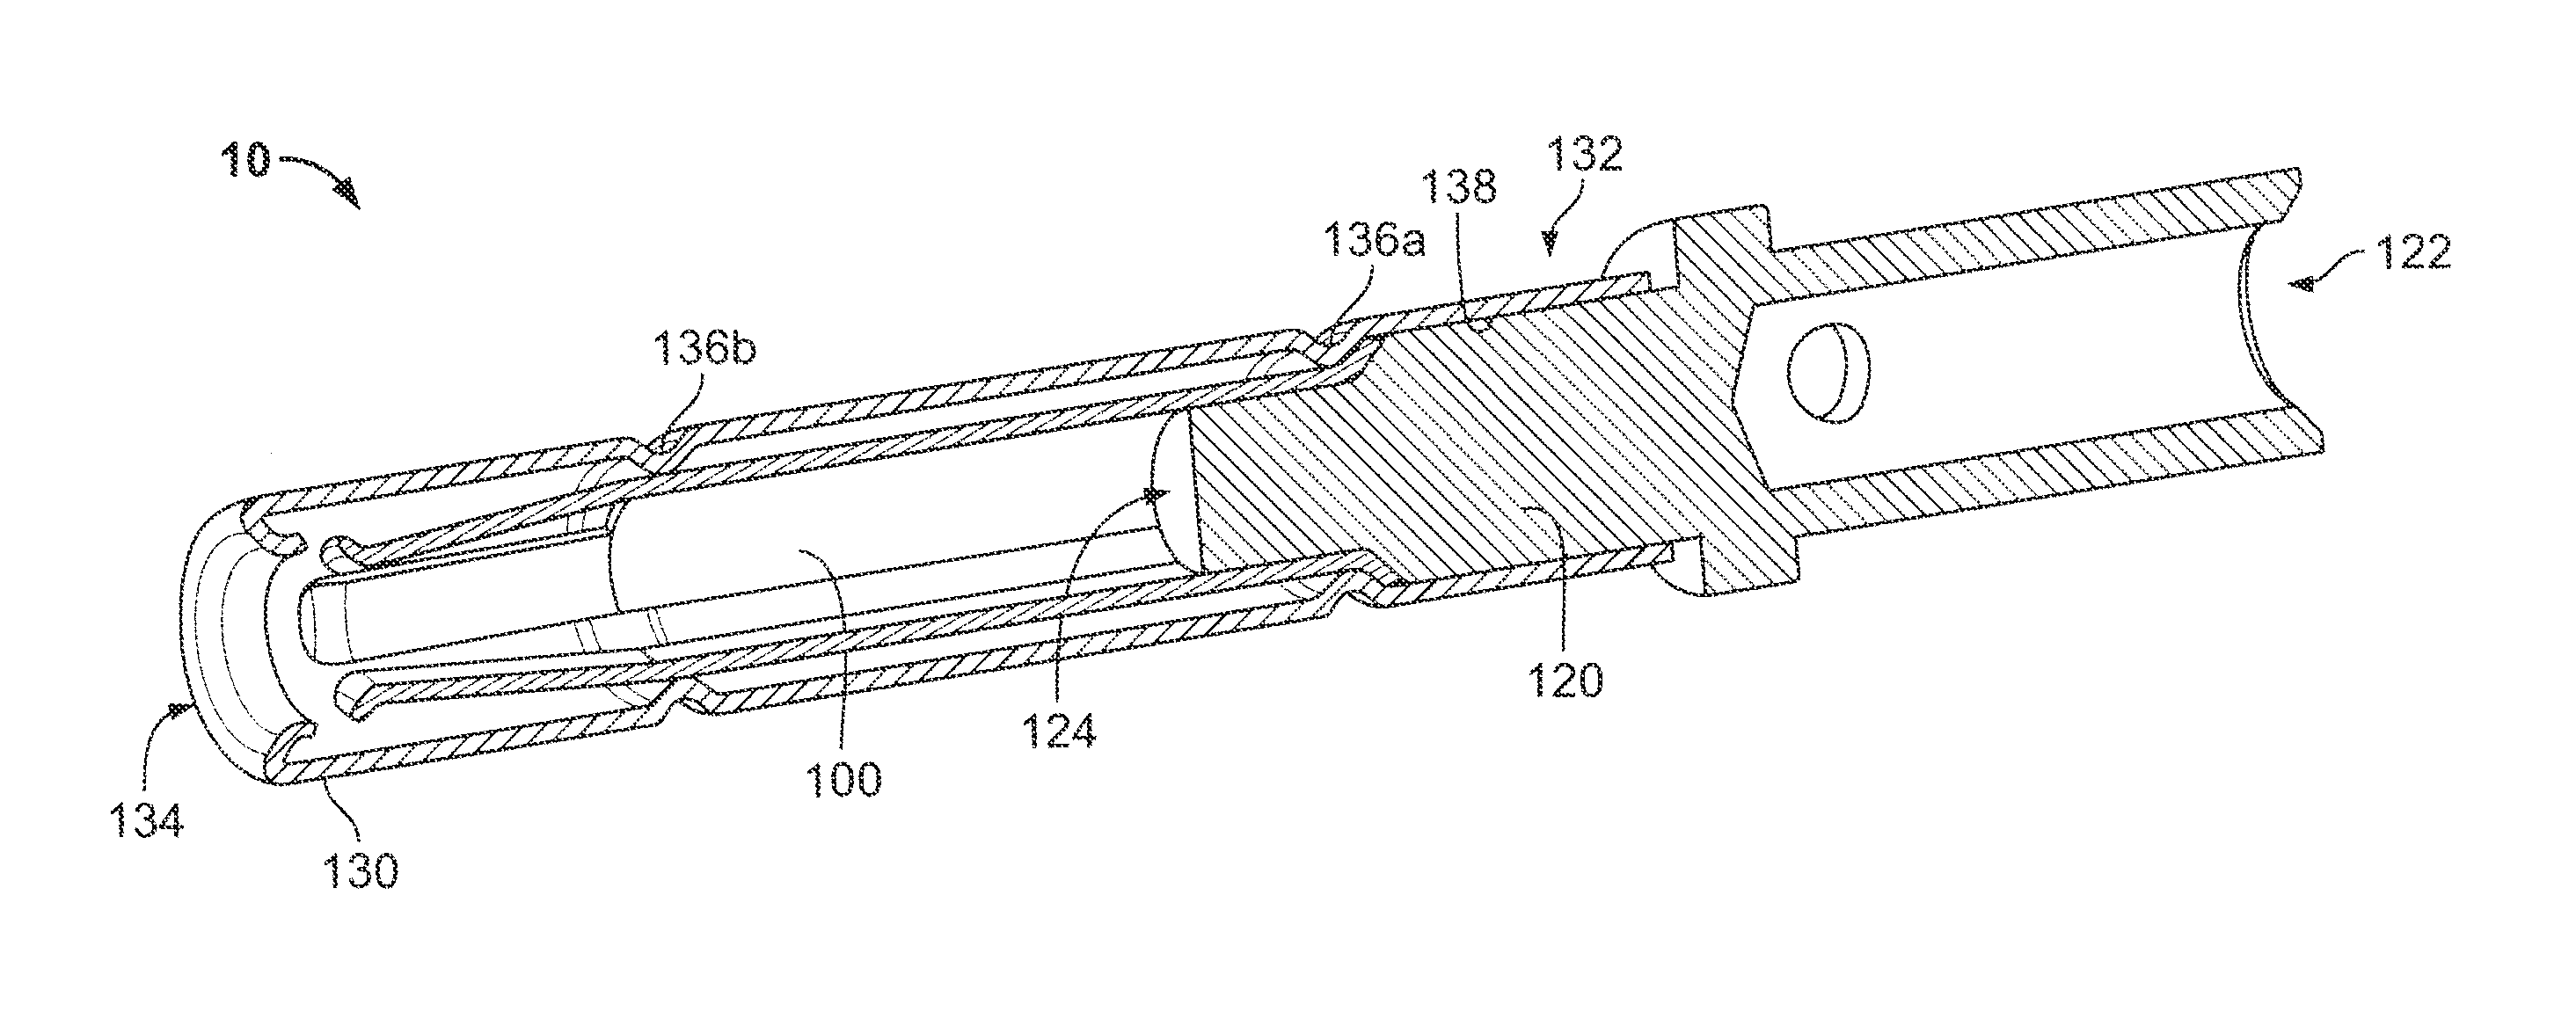 Multi-piece socket contact assembly